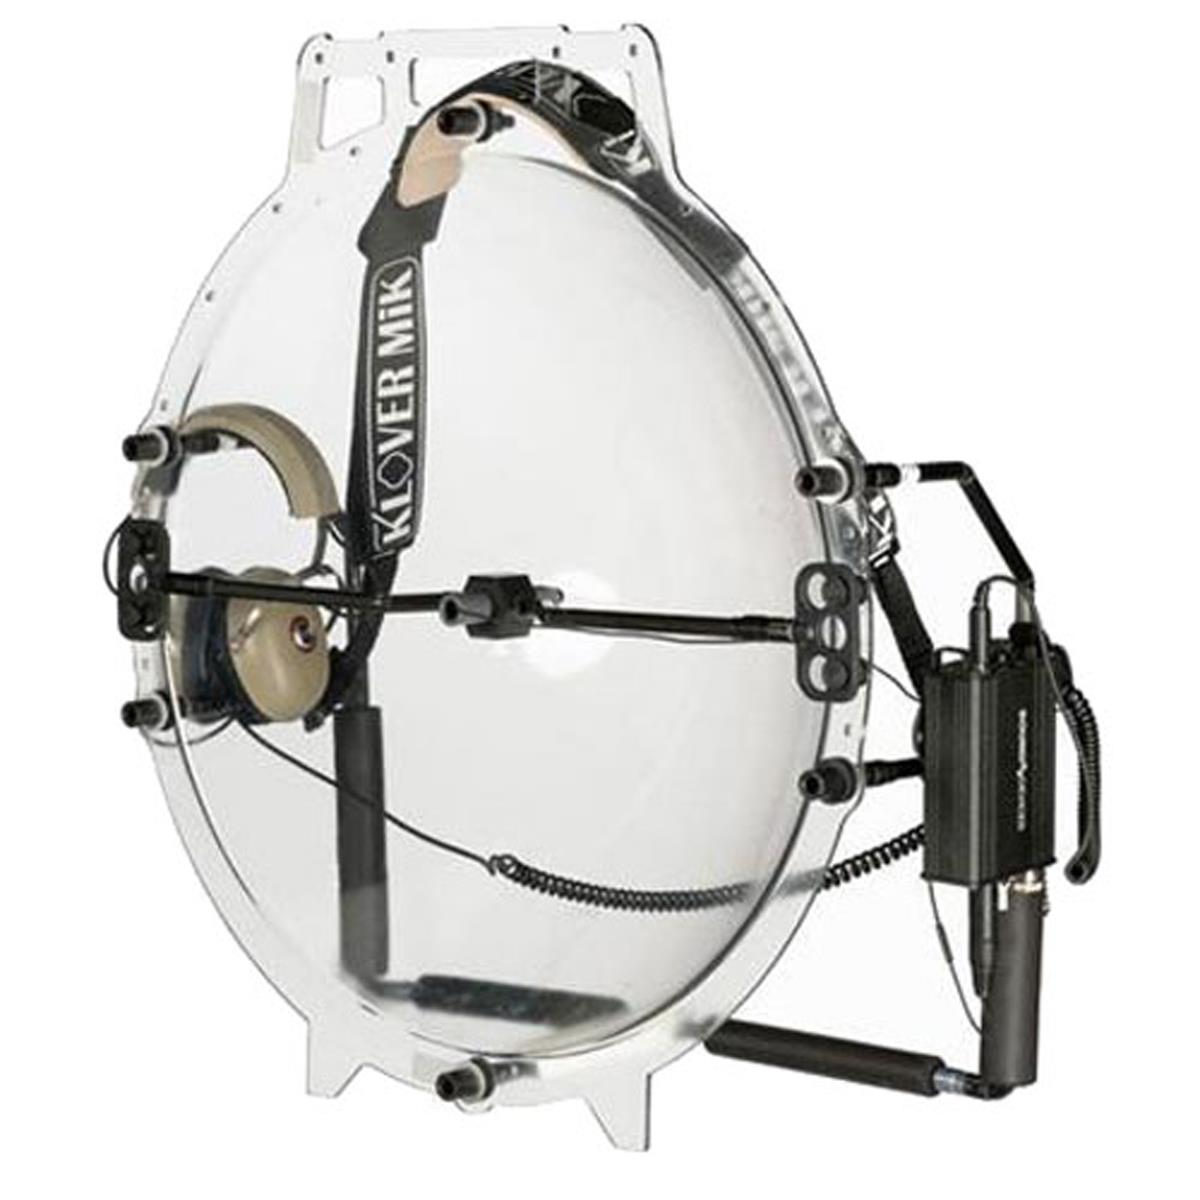 Image of Klover MiK 26 Tactical Parabolic Collector